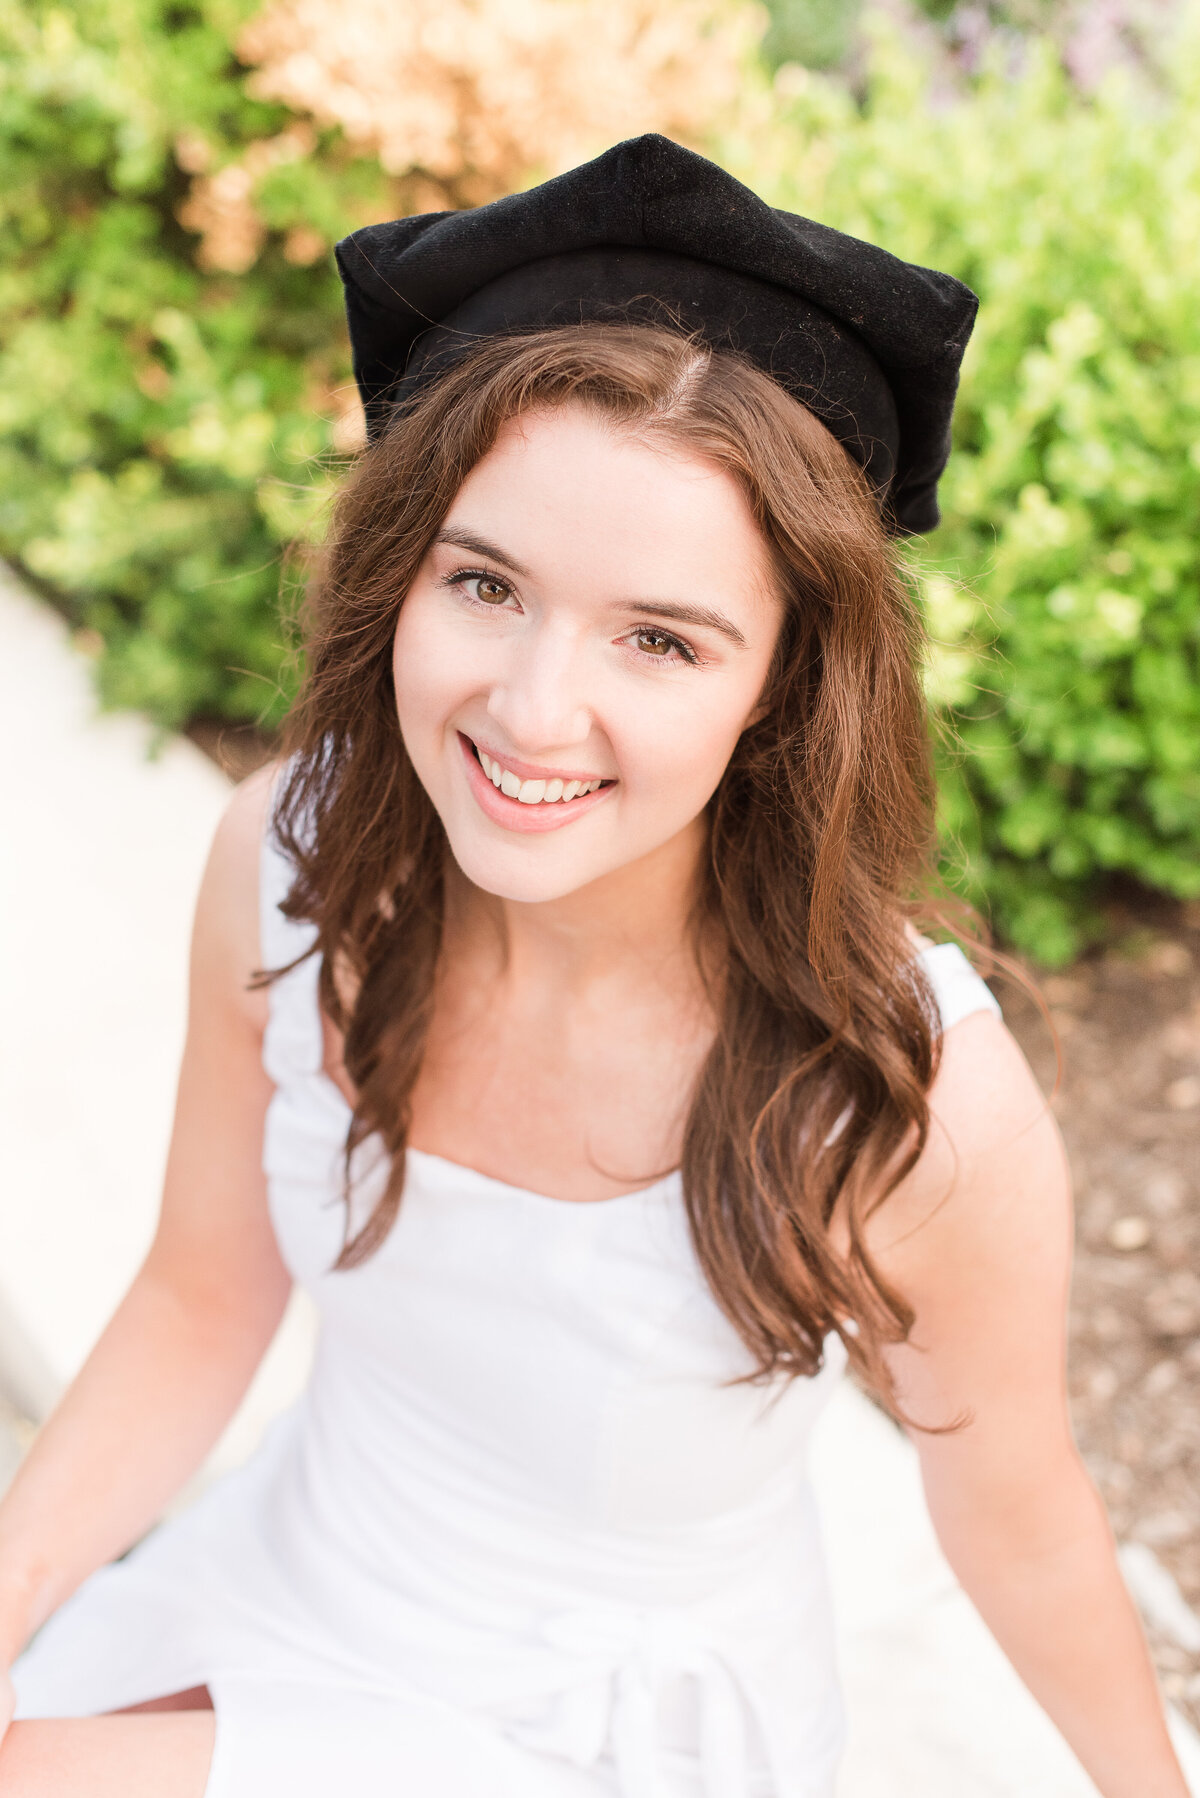 grad with black cap and white dress